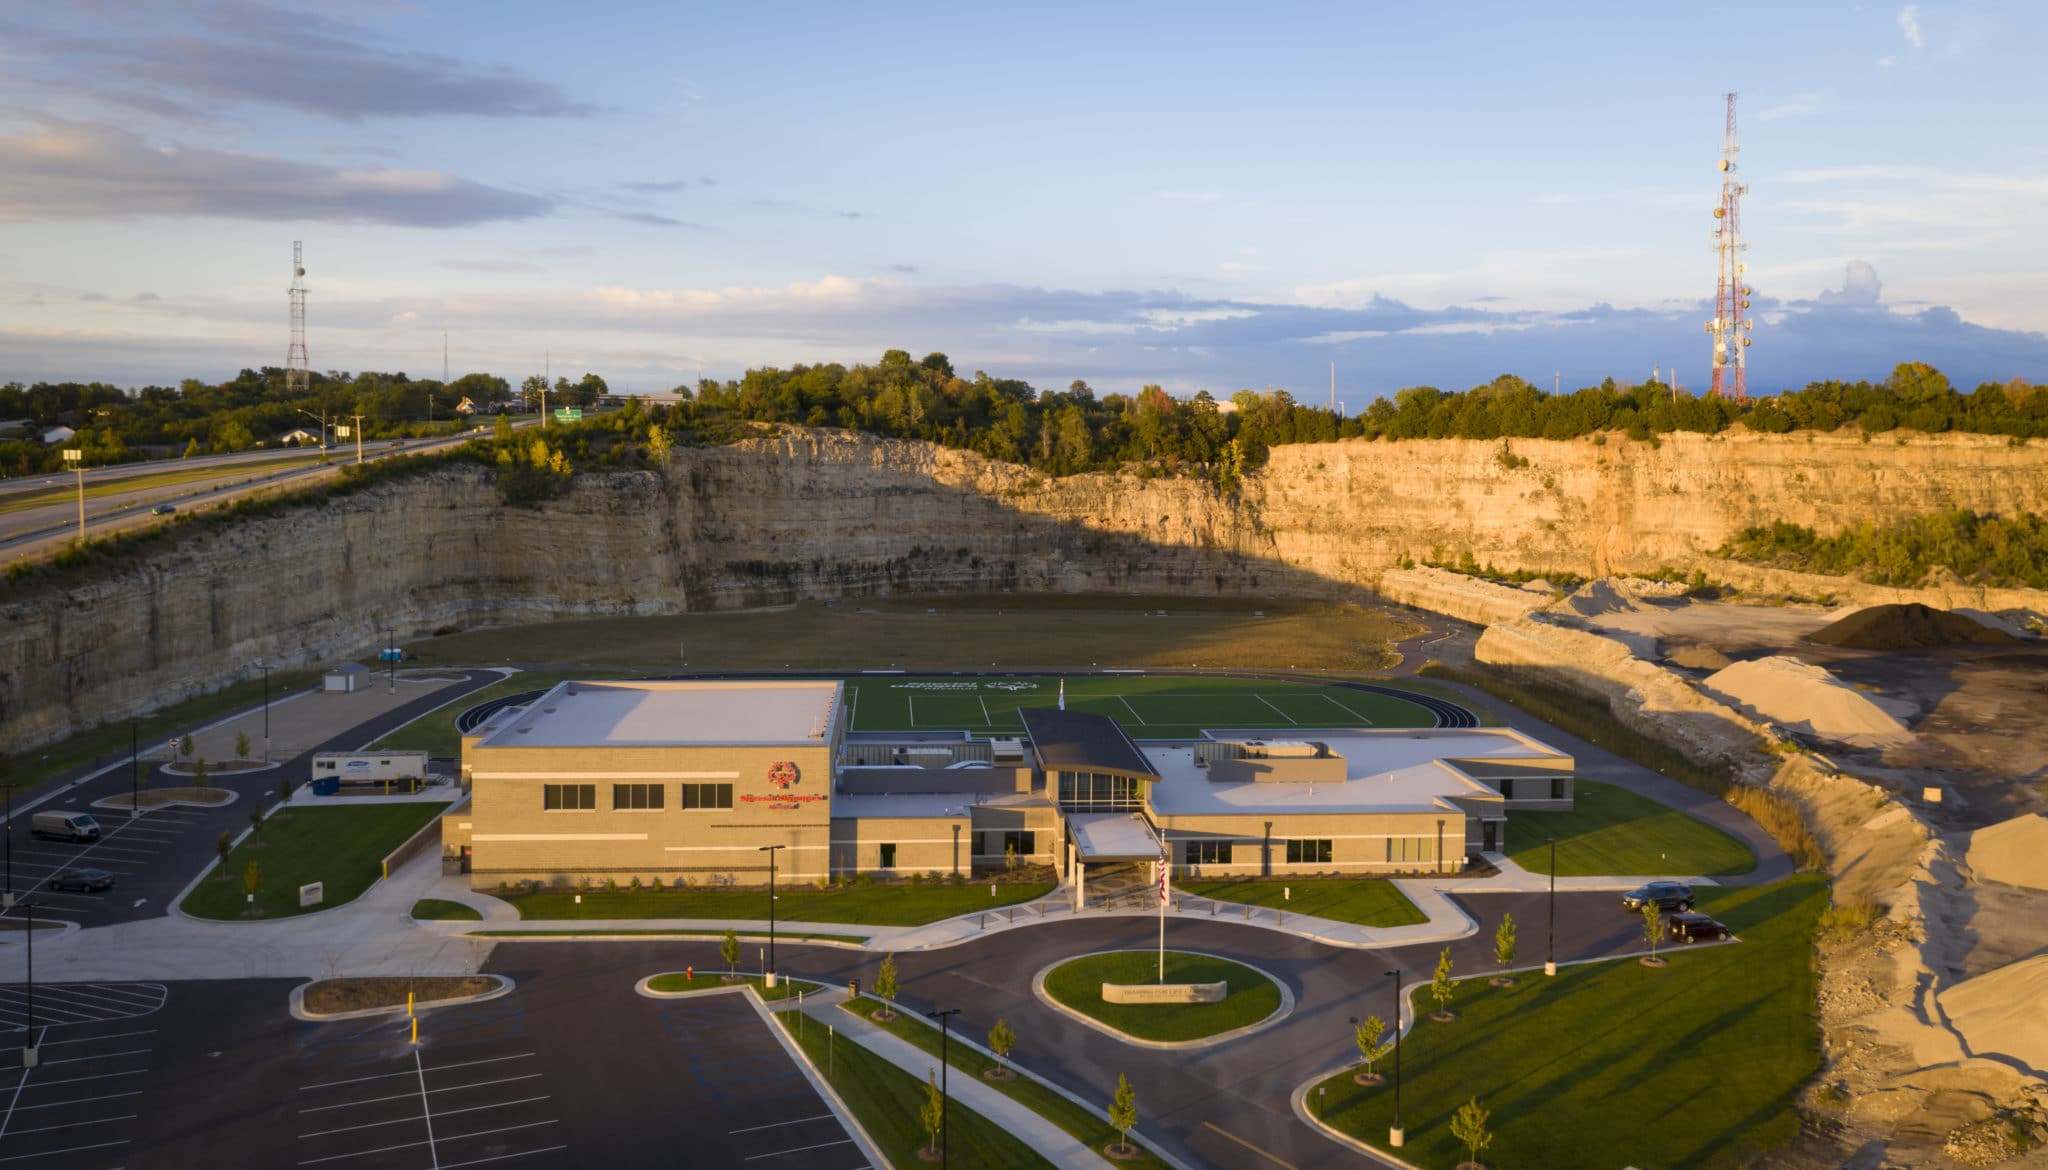 An aerial photo of the front entrance of the Training for Life Campus at sunset